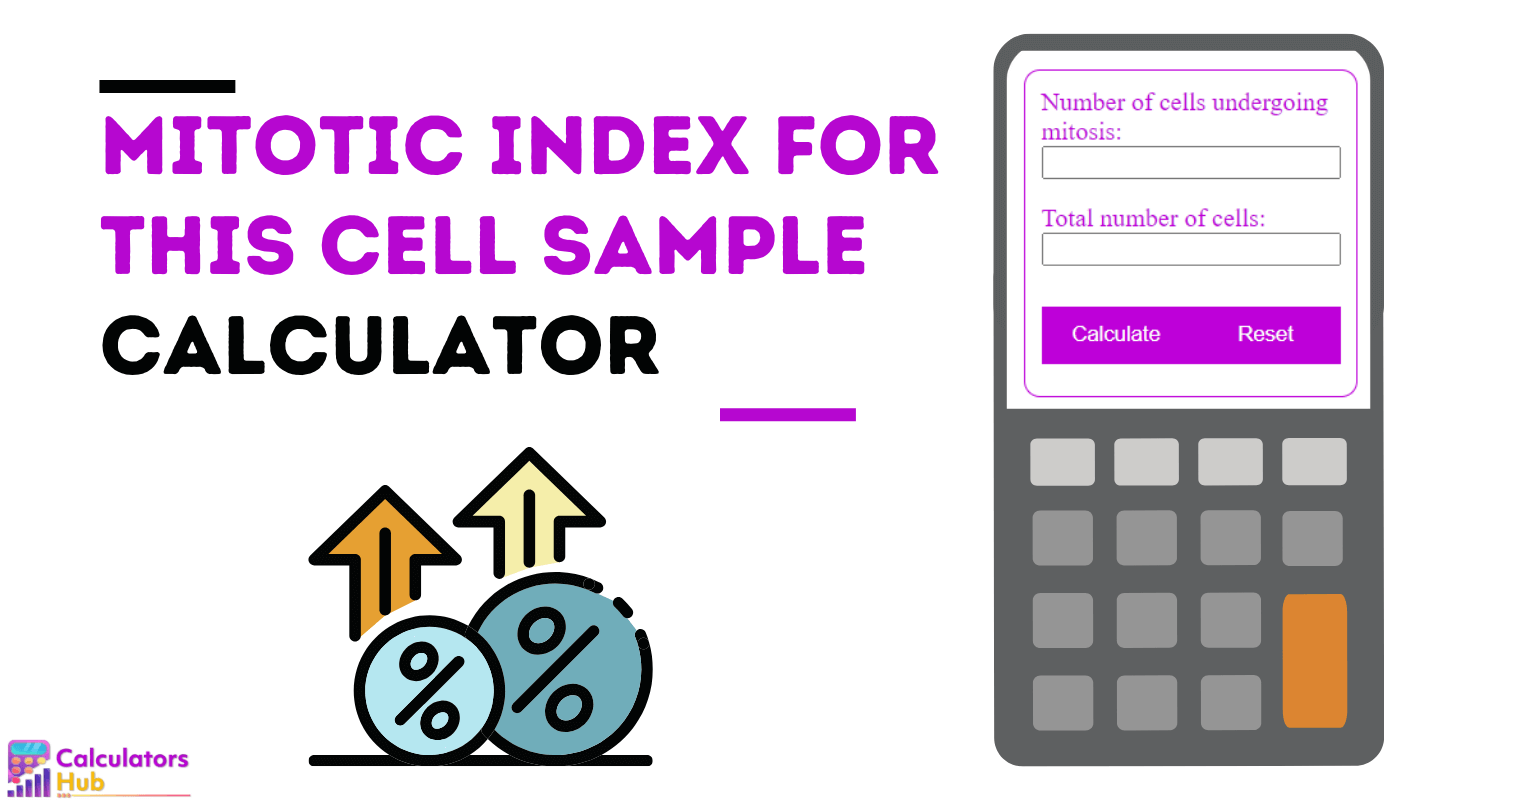 Mitotic Index for this Cell Sample Calculator